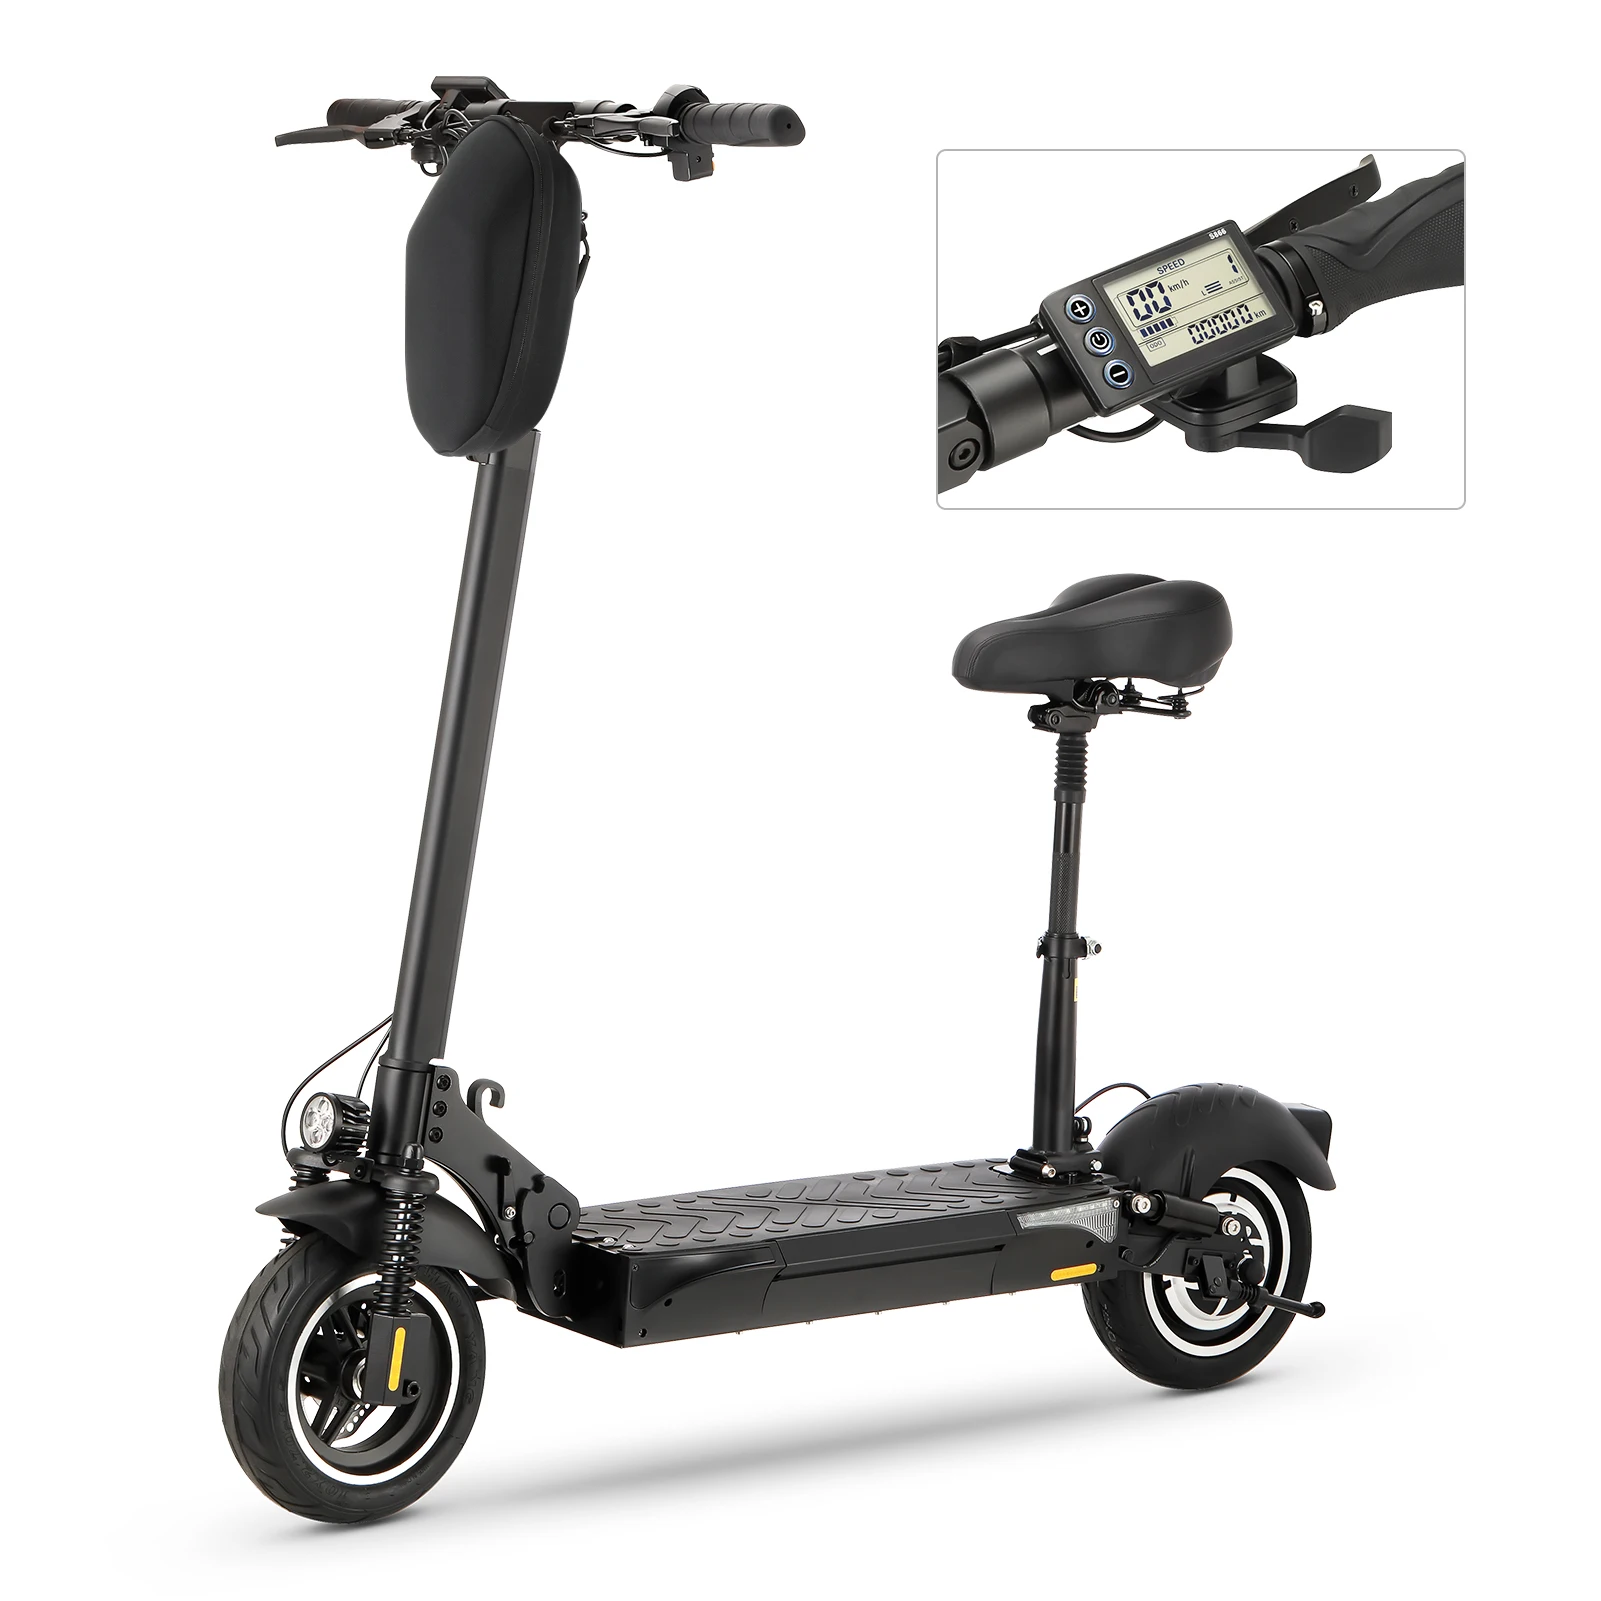 

iscooter EU/UK Hot sales 10 inch Electric Motorcycle Scooter 13 AH T4 ix4 500 W dual motor off road Electric Scooters